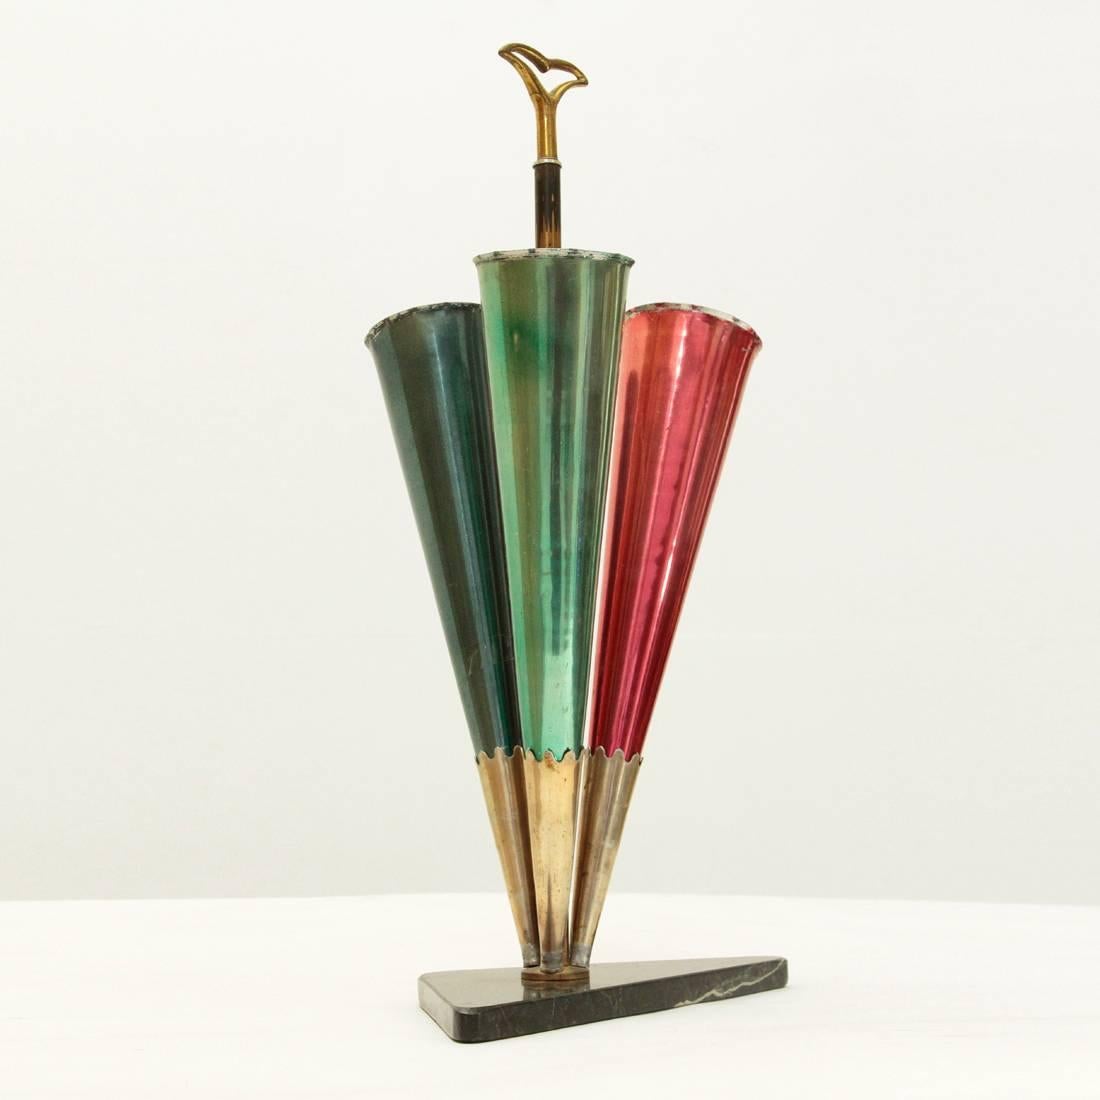 Italian umbrella stand of production from the 1950s.
Triangular marble base, brass stem with stylized handle,
three cones in brass and colored aluminum.
Good general conditions, signs of use.

Dimensions: Width 35 cm, depth 25 cm, height 65 cm.